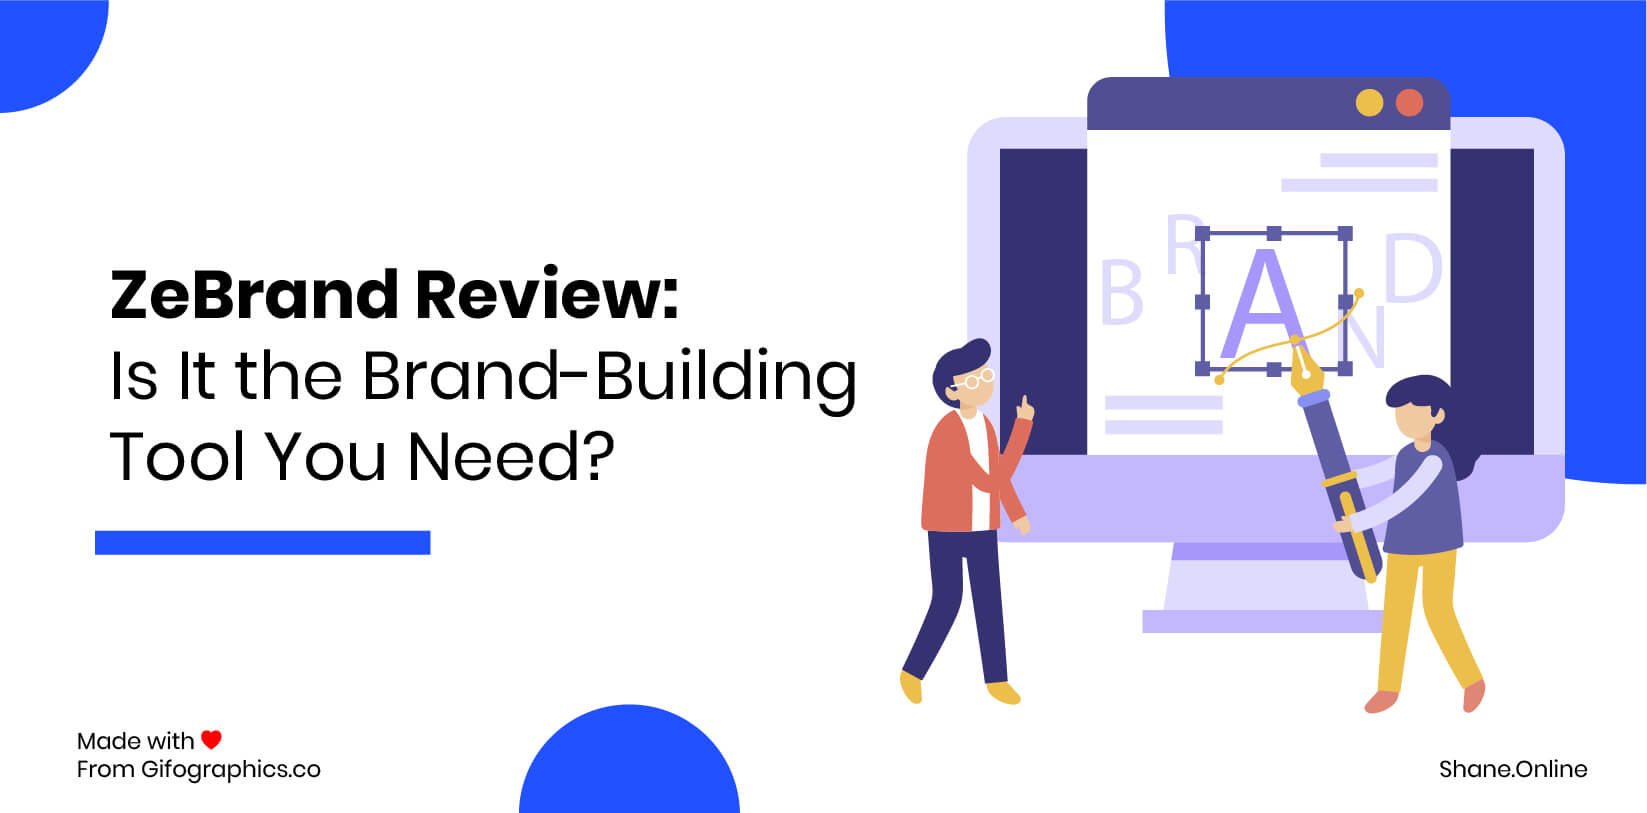 ZeBrand Review: Is It the Brand-Building Platform You Need?